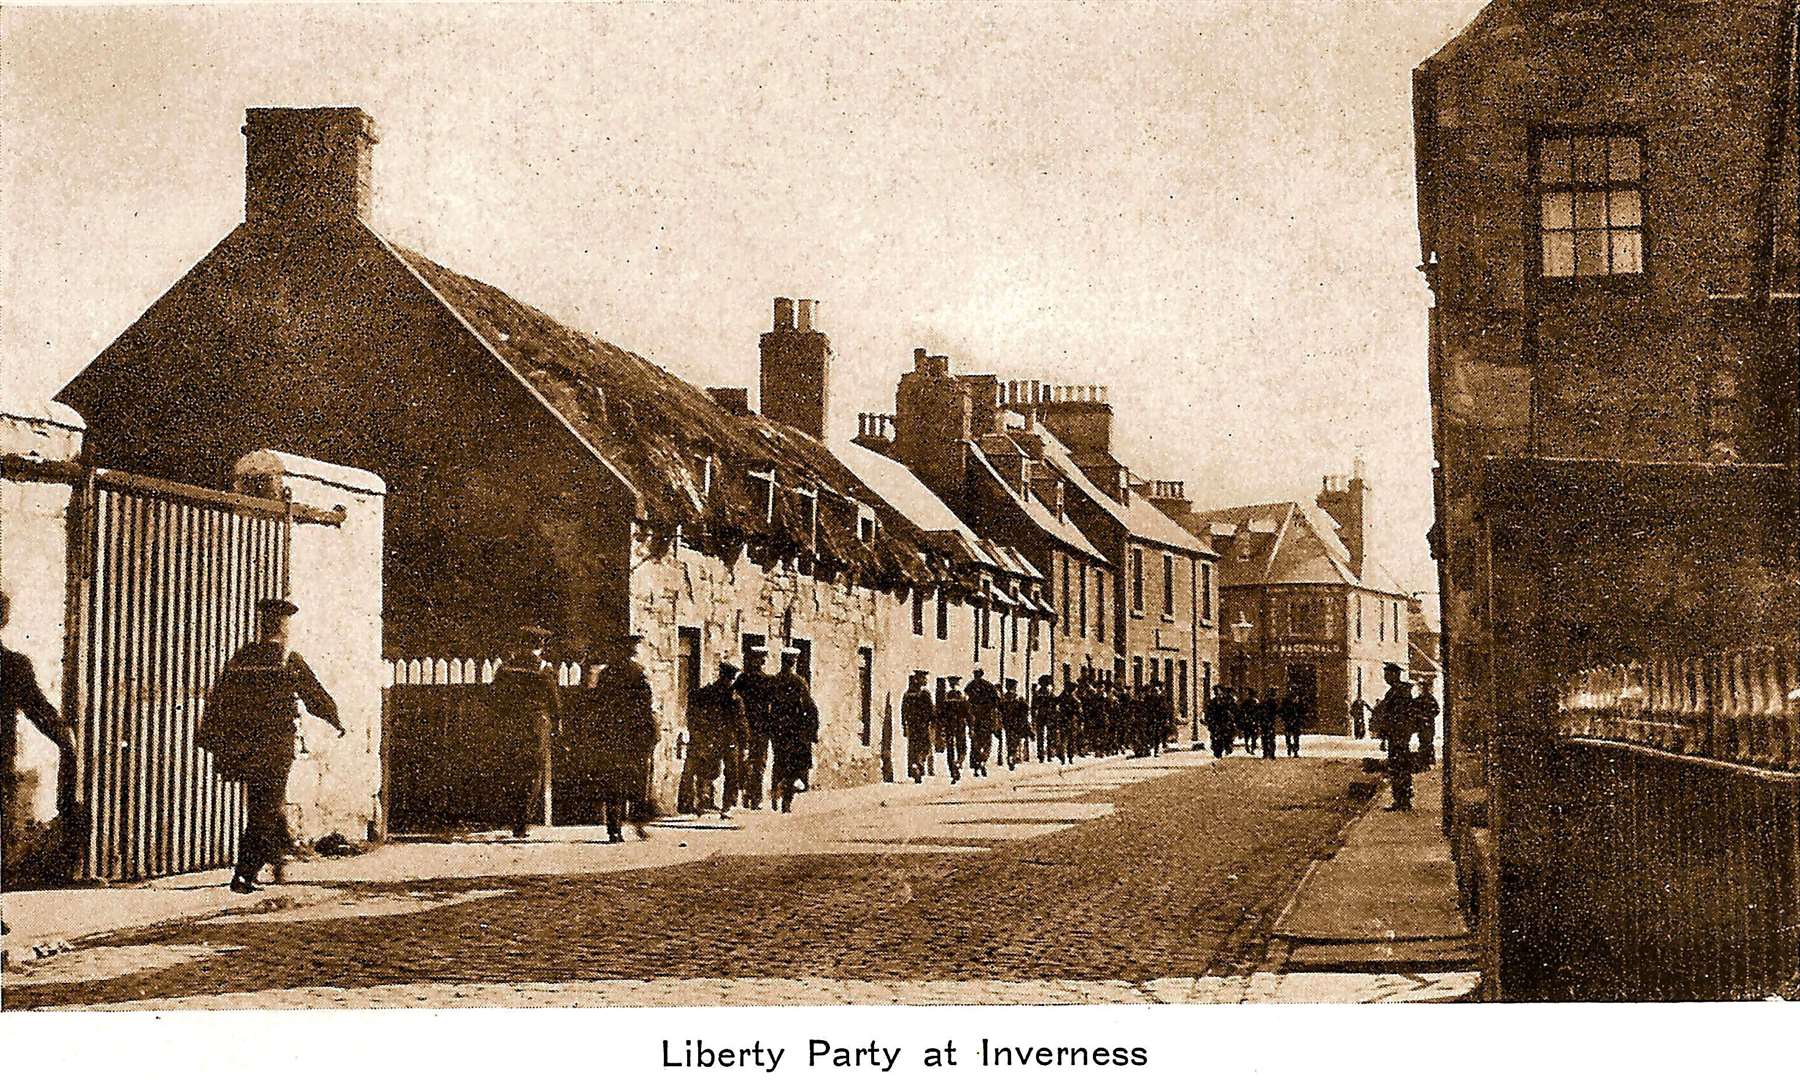 A liberty party of US sailors heads into Inverness town centre.